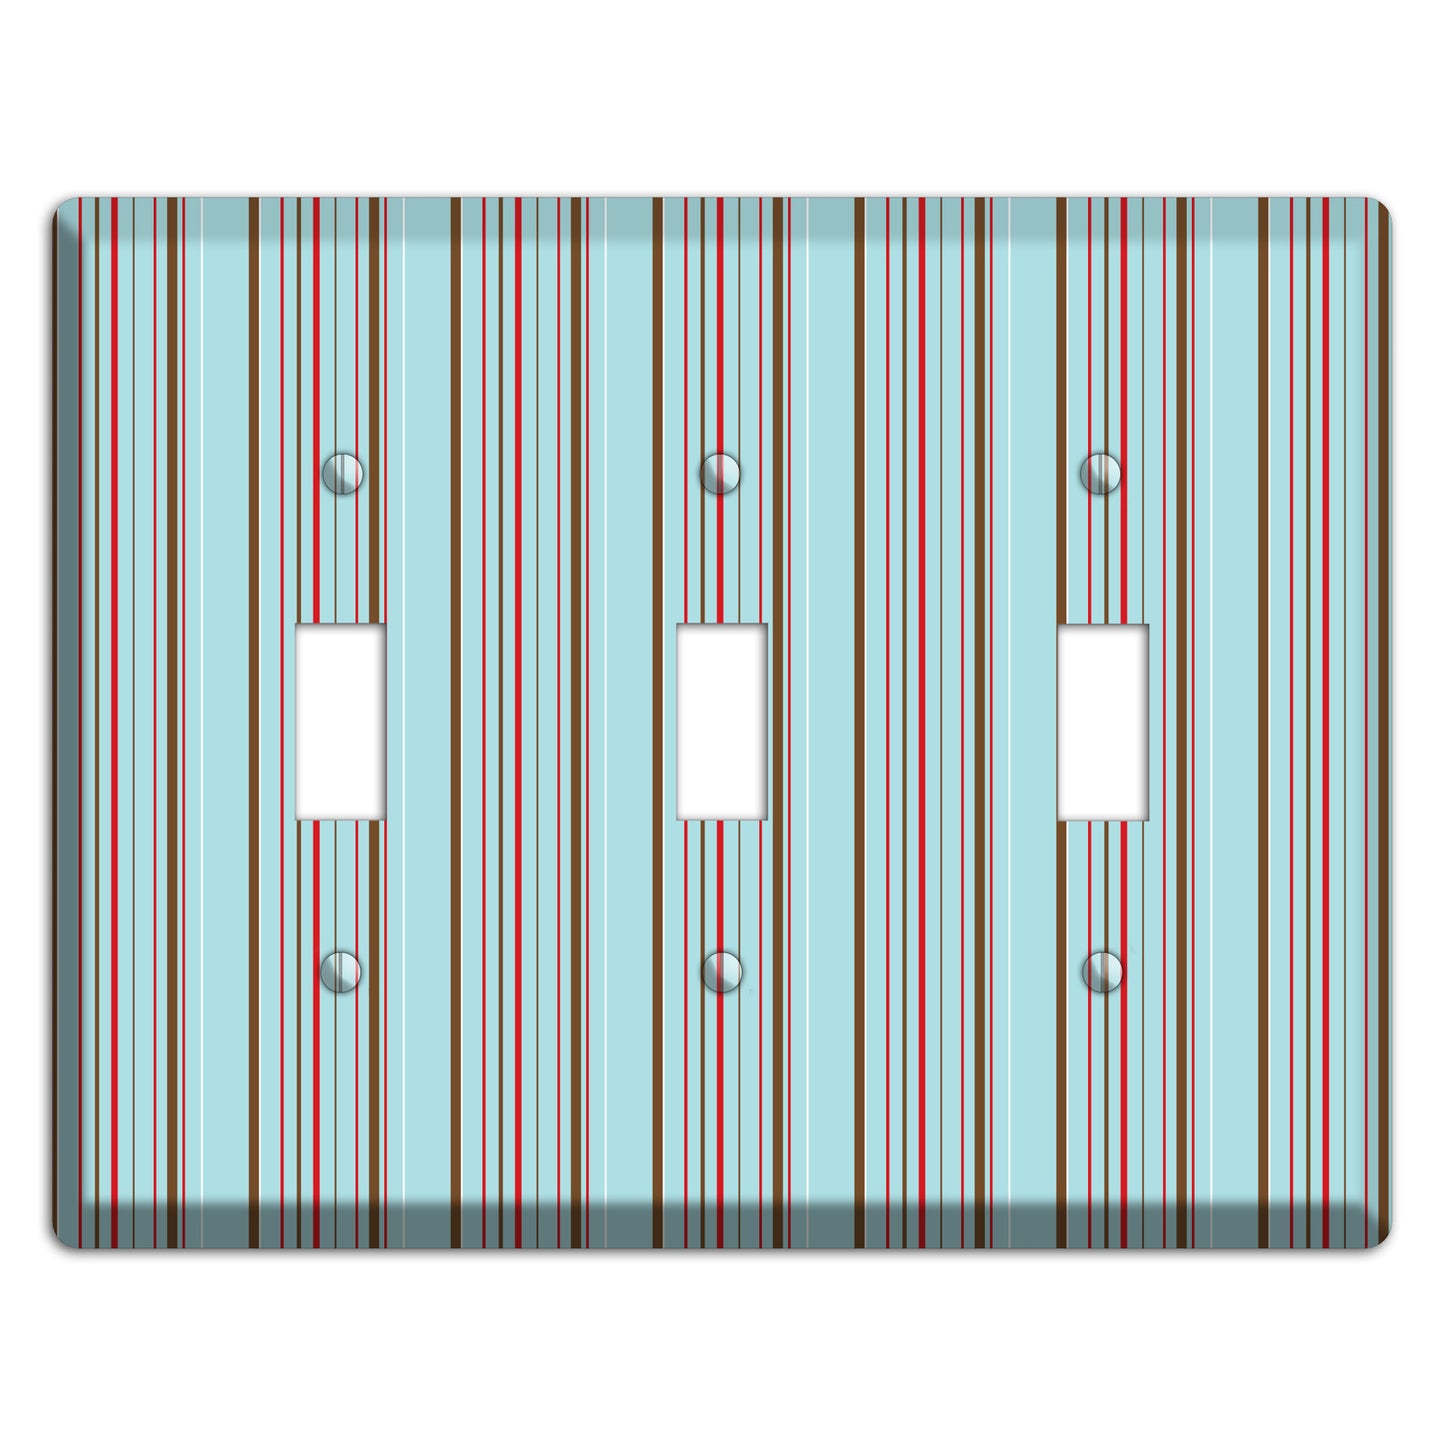 Dusty Blue with Red and Brown Vertical Stripes 3 Toggle Wallplate